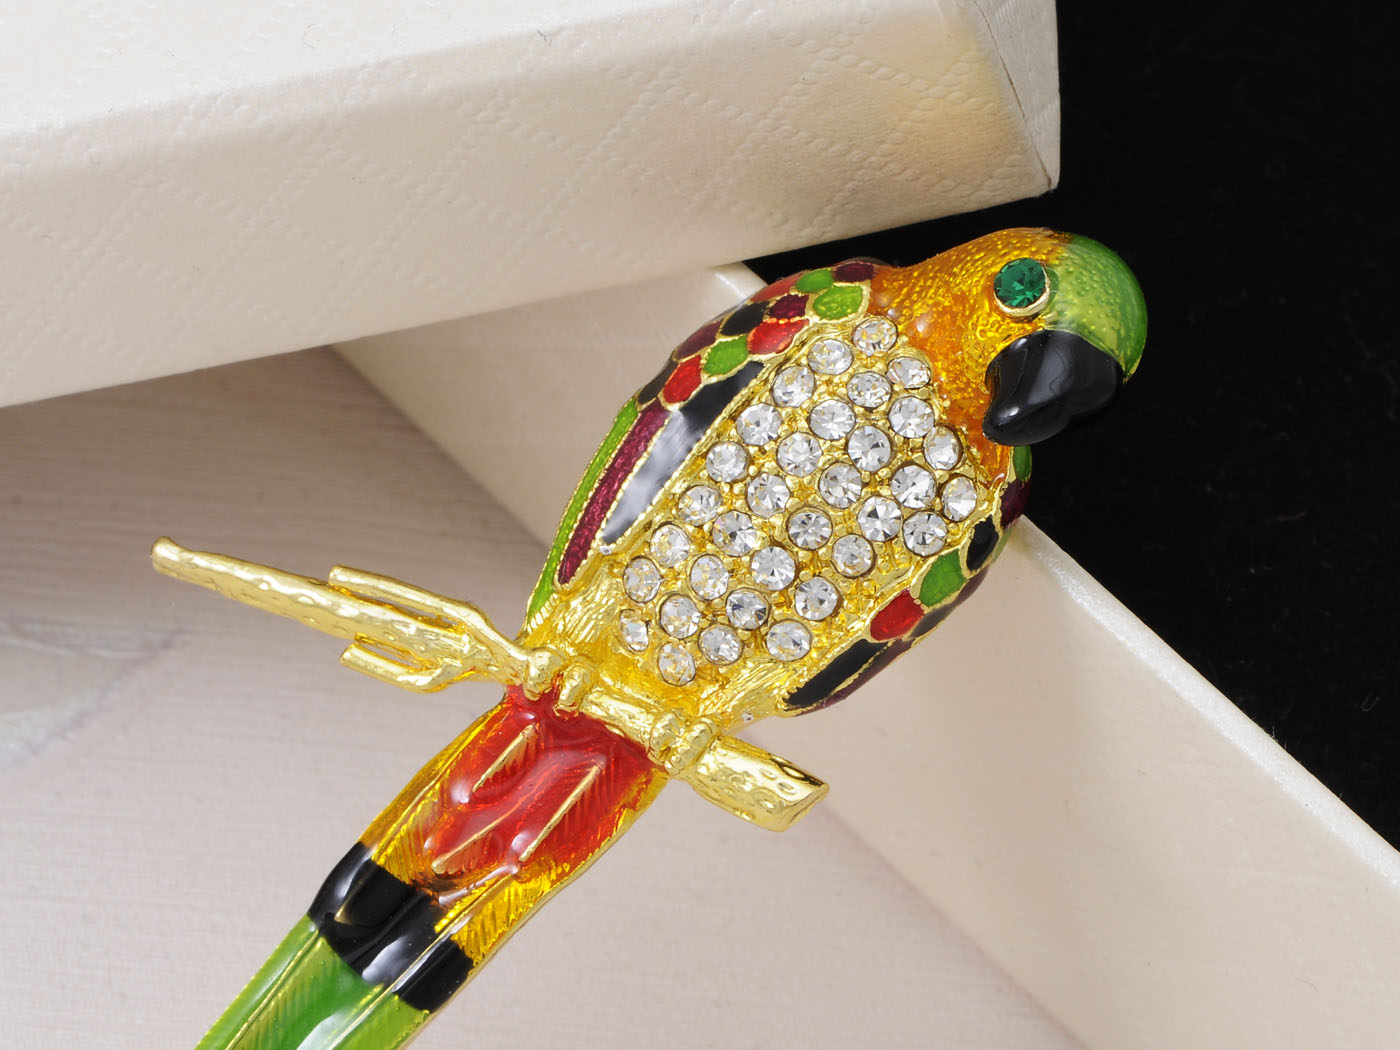 Tropical Rainbow Colorful Parrot Bird Brooch Pin